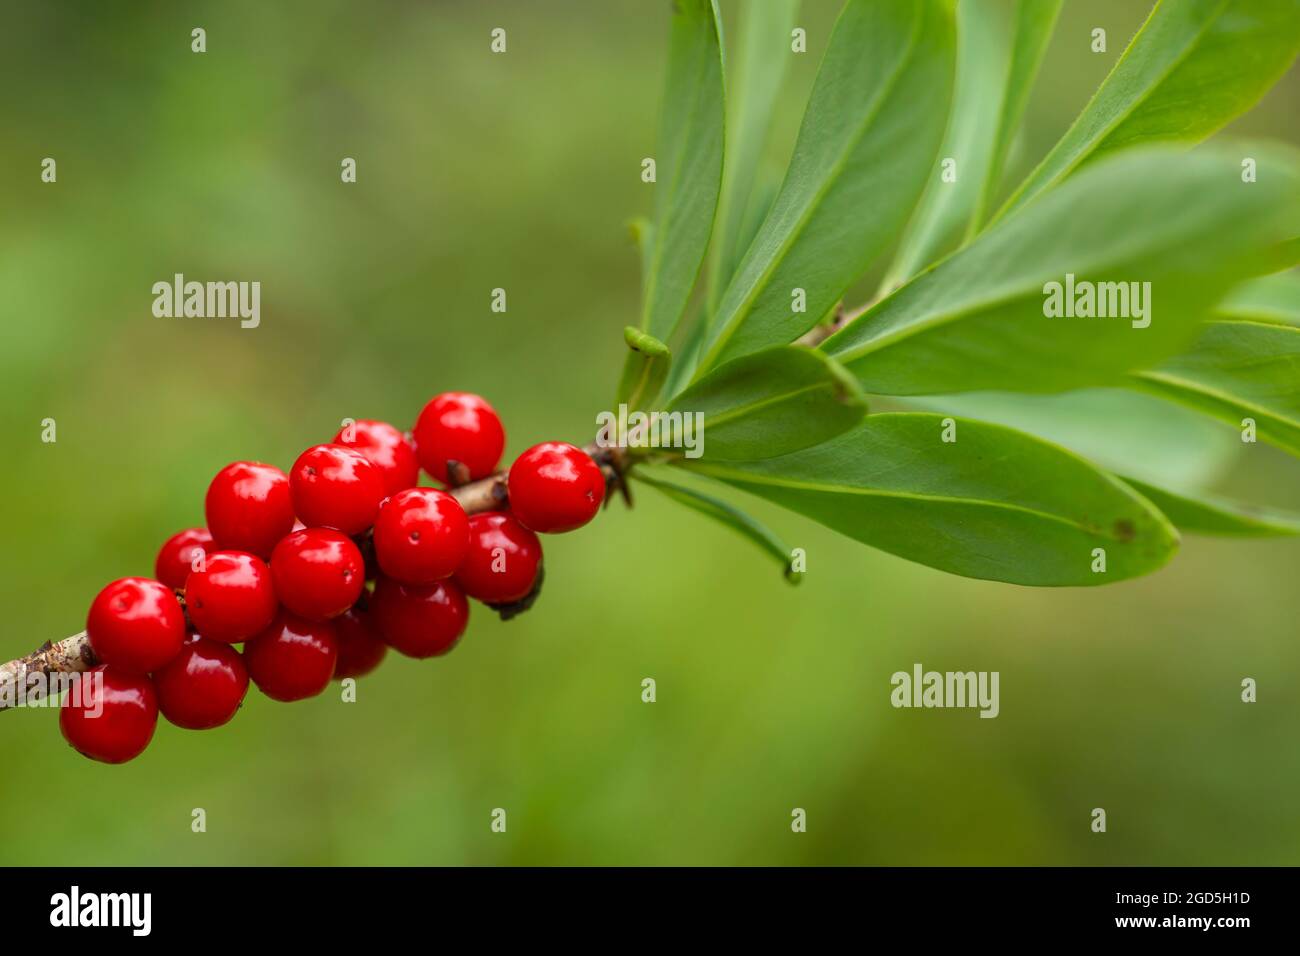 Red poisonous berries and green leaves of the mezereum (Daphne mezereum) growing in Finnish nature Stock Photo